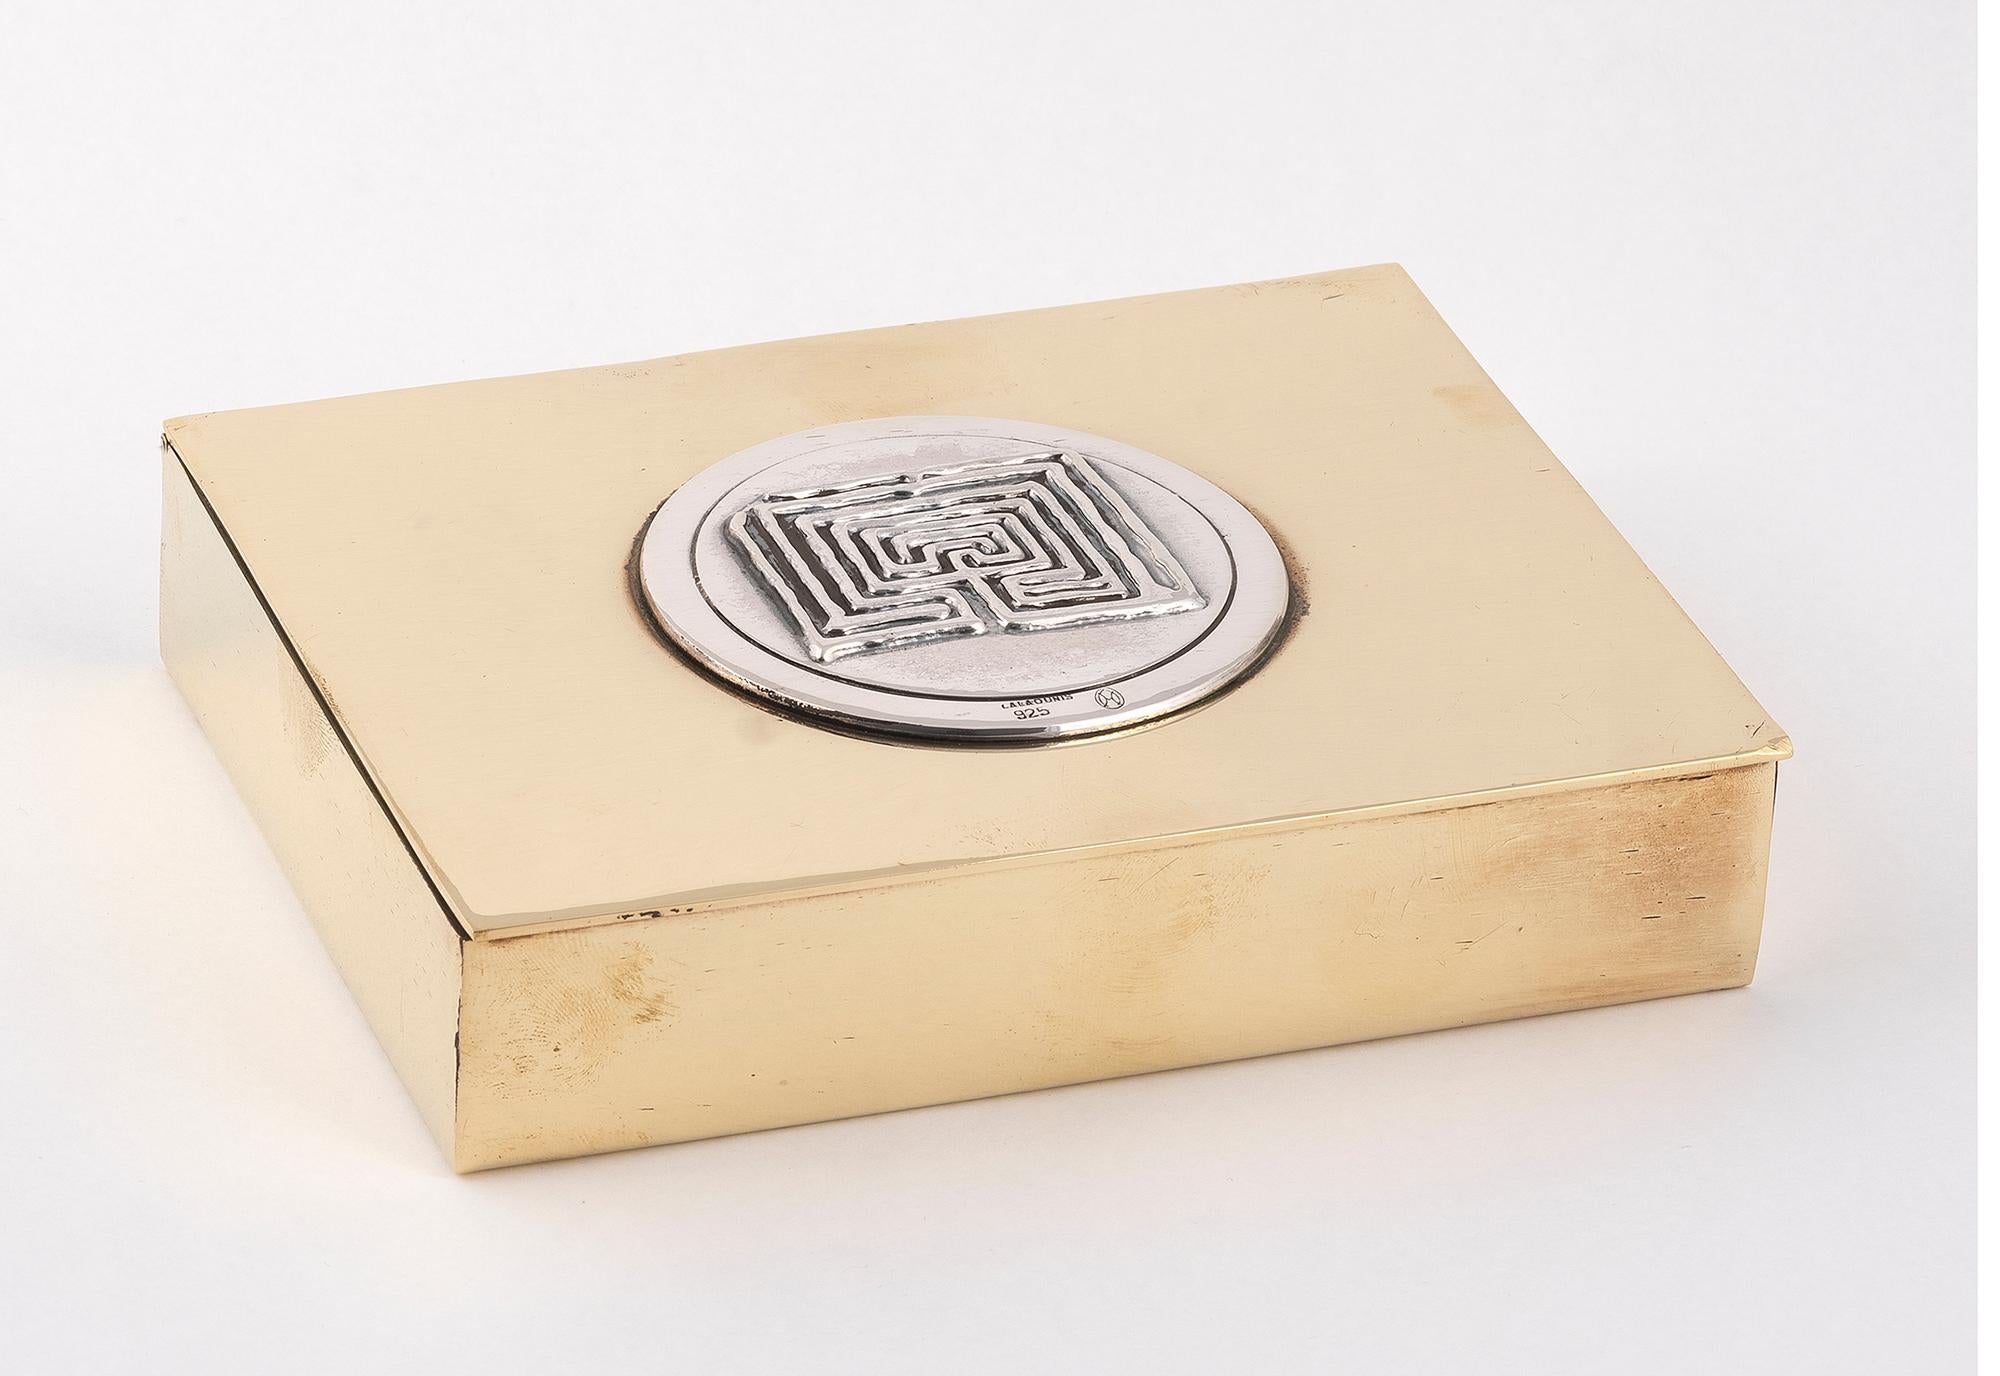 Arts and Crafts Rare Labyrinth Cigarette Box by Lalaounis, Brass and Silver, 1970s For Sale